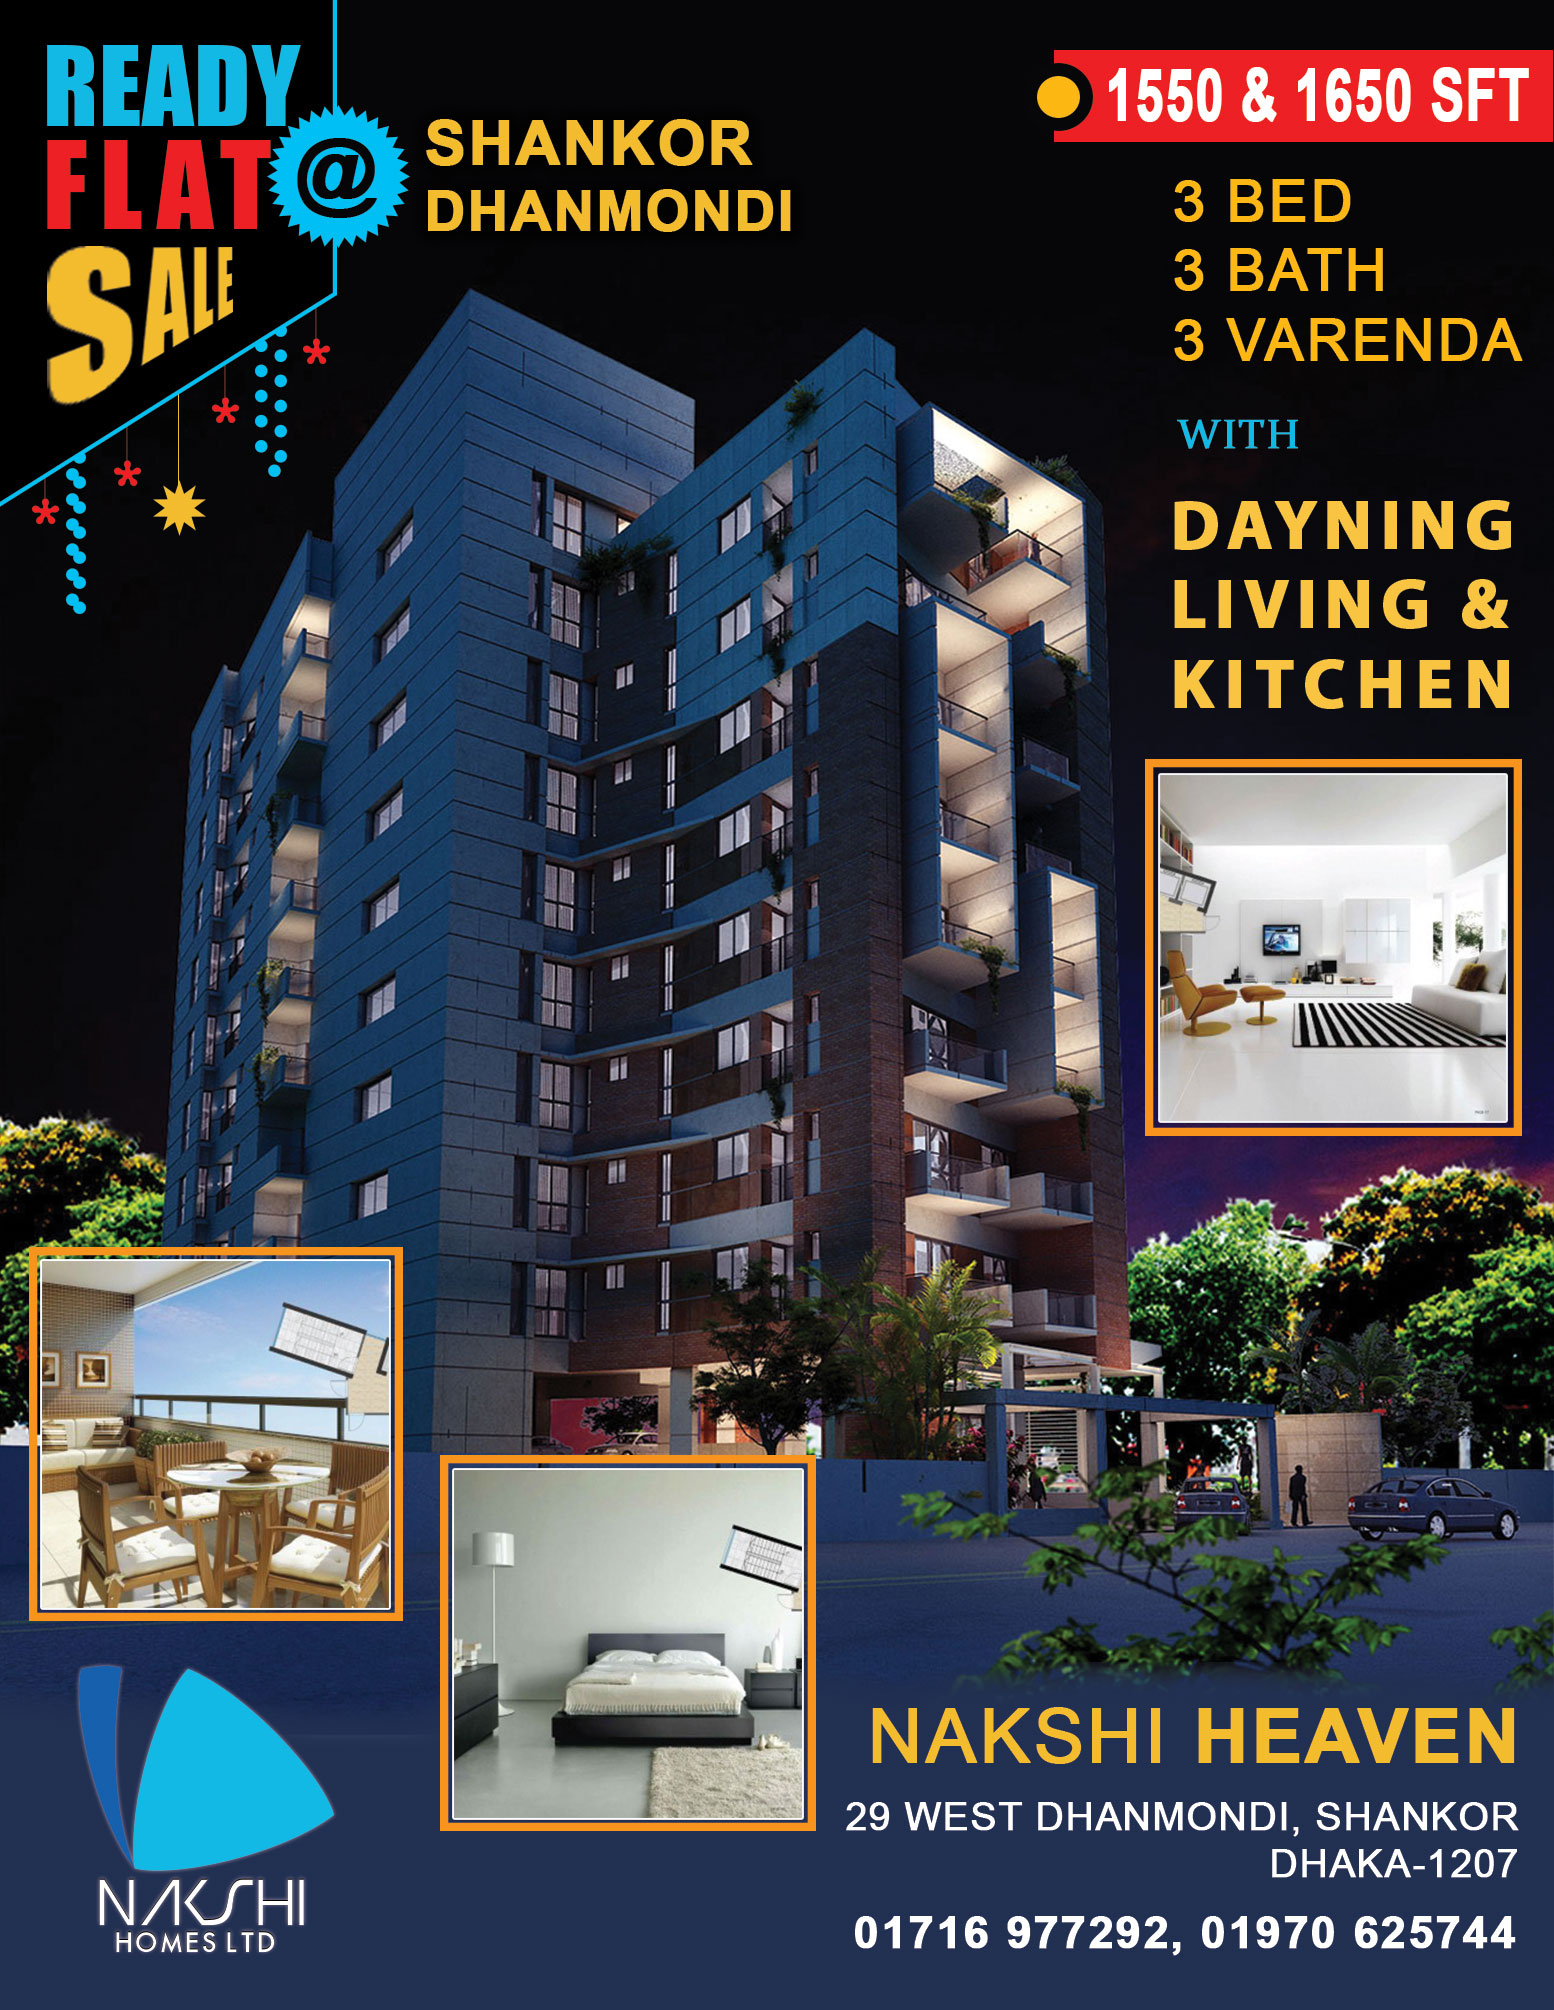 You are currently viewing Ready Flat Sale at Sangkor Dhanmondi